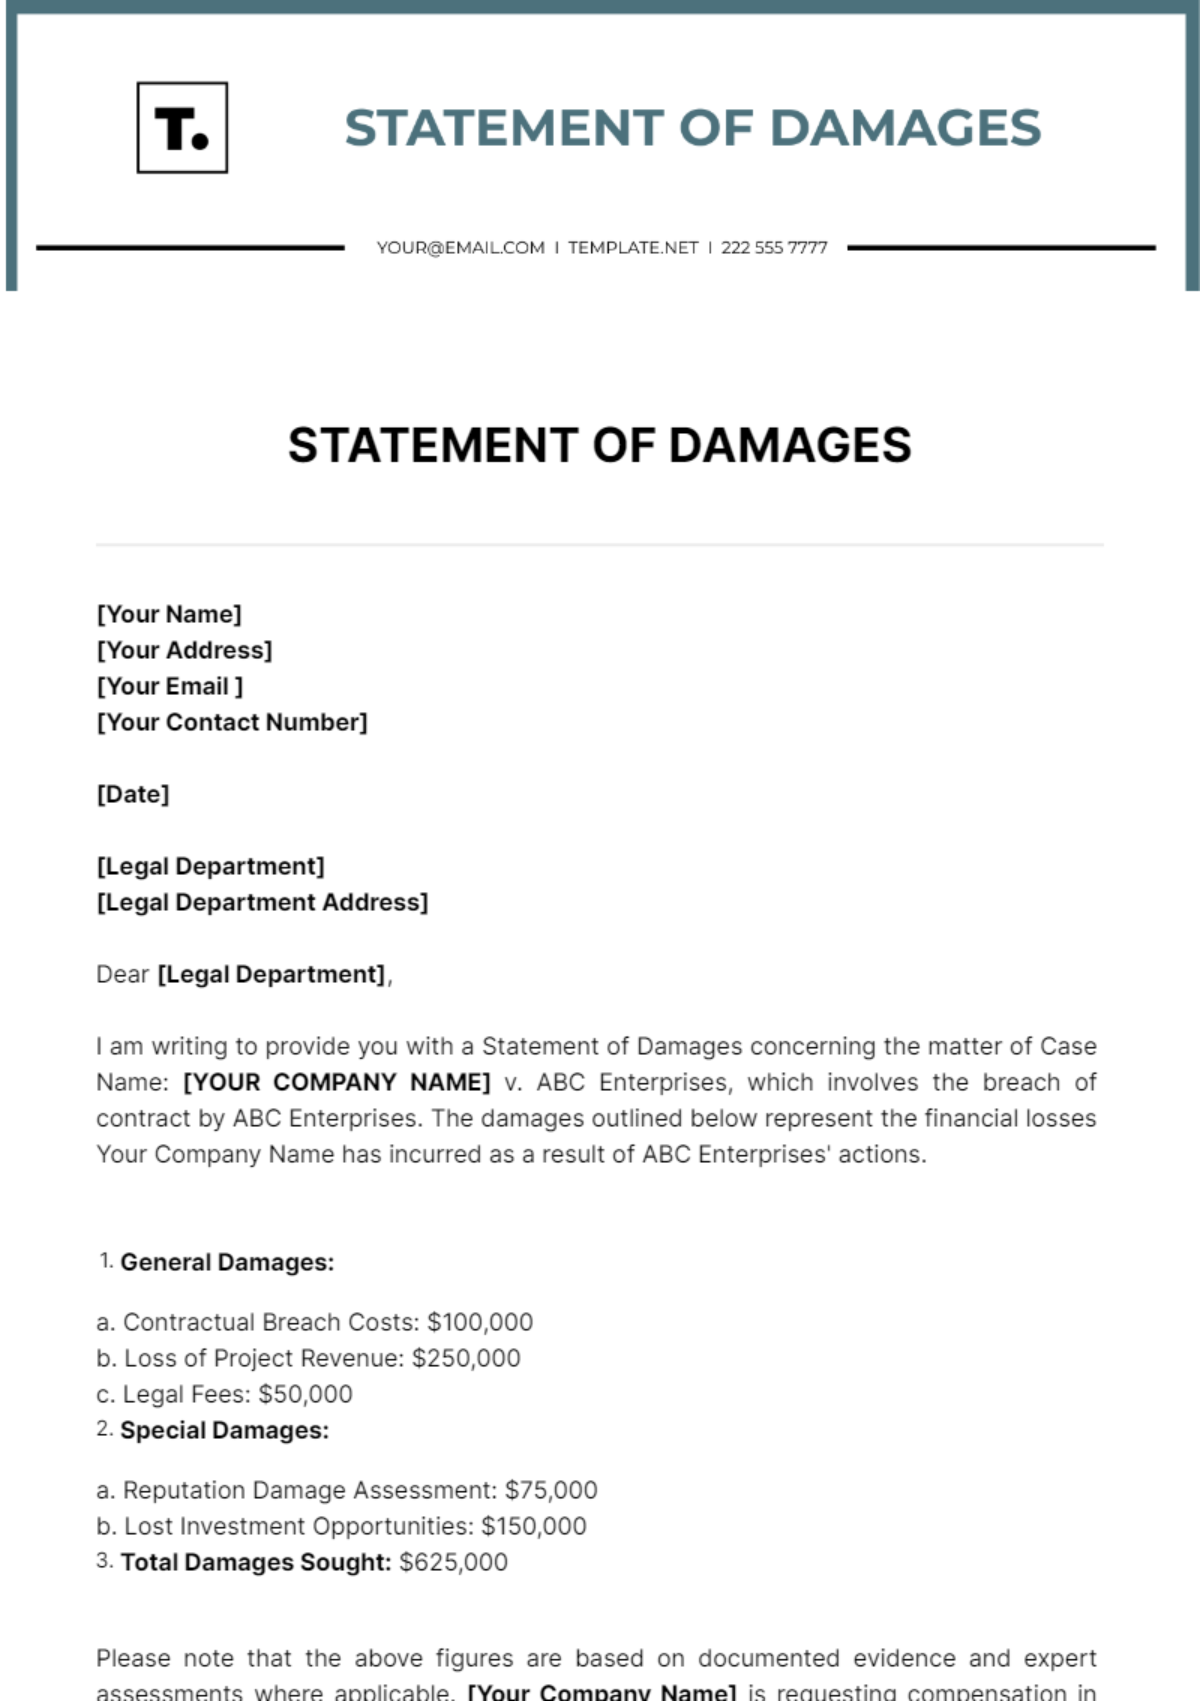 Statement of Damages Template